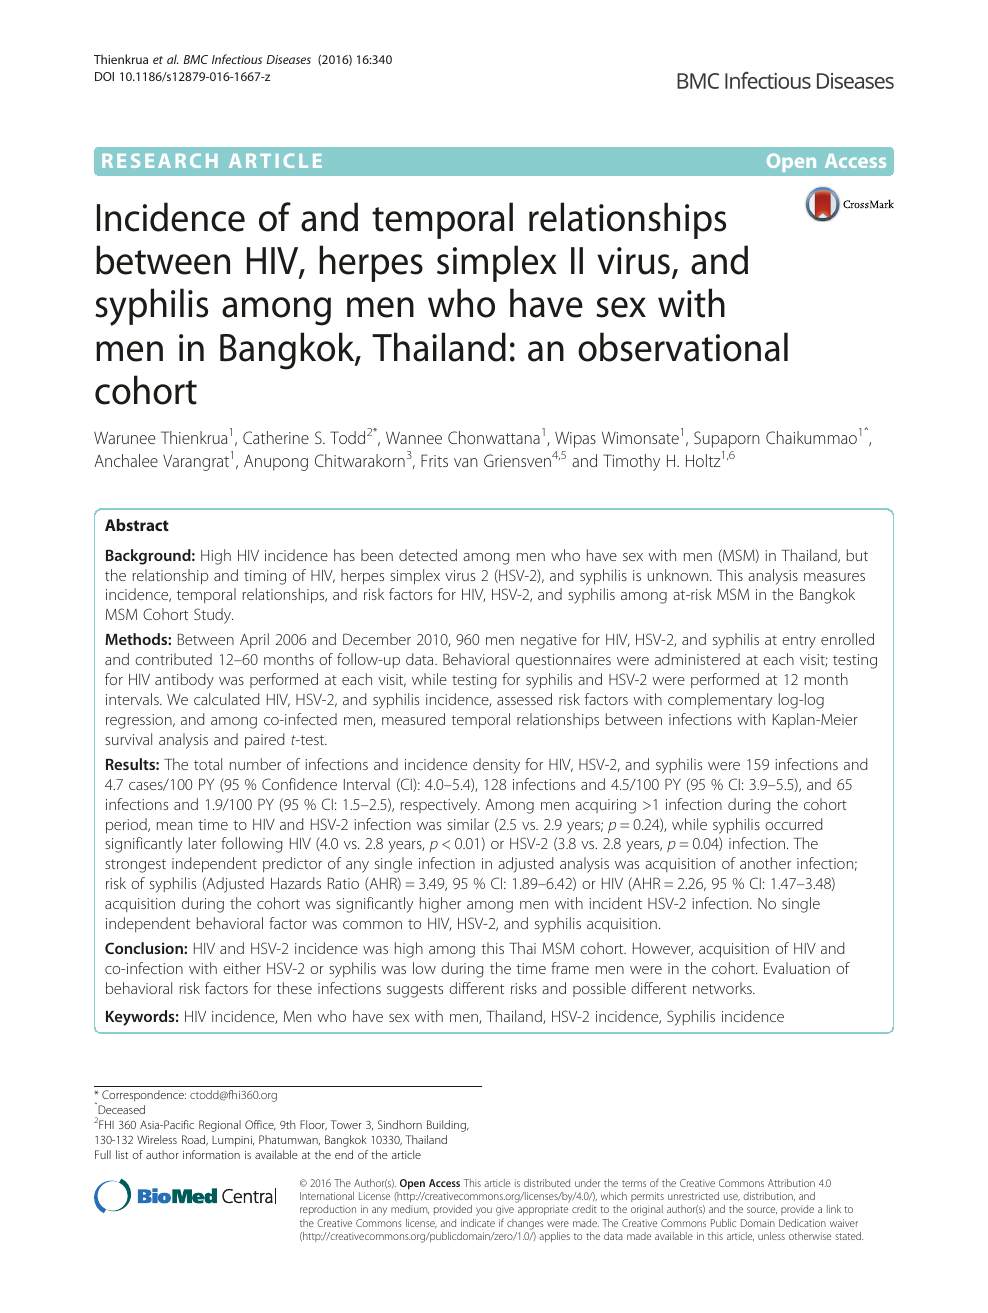 Incidence Of And Temporal Relationships Between Hiv Herpes